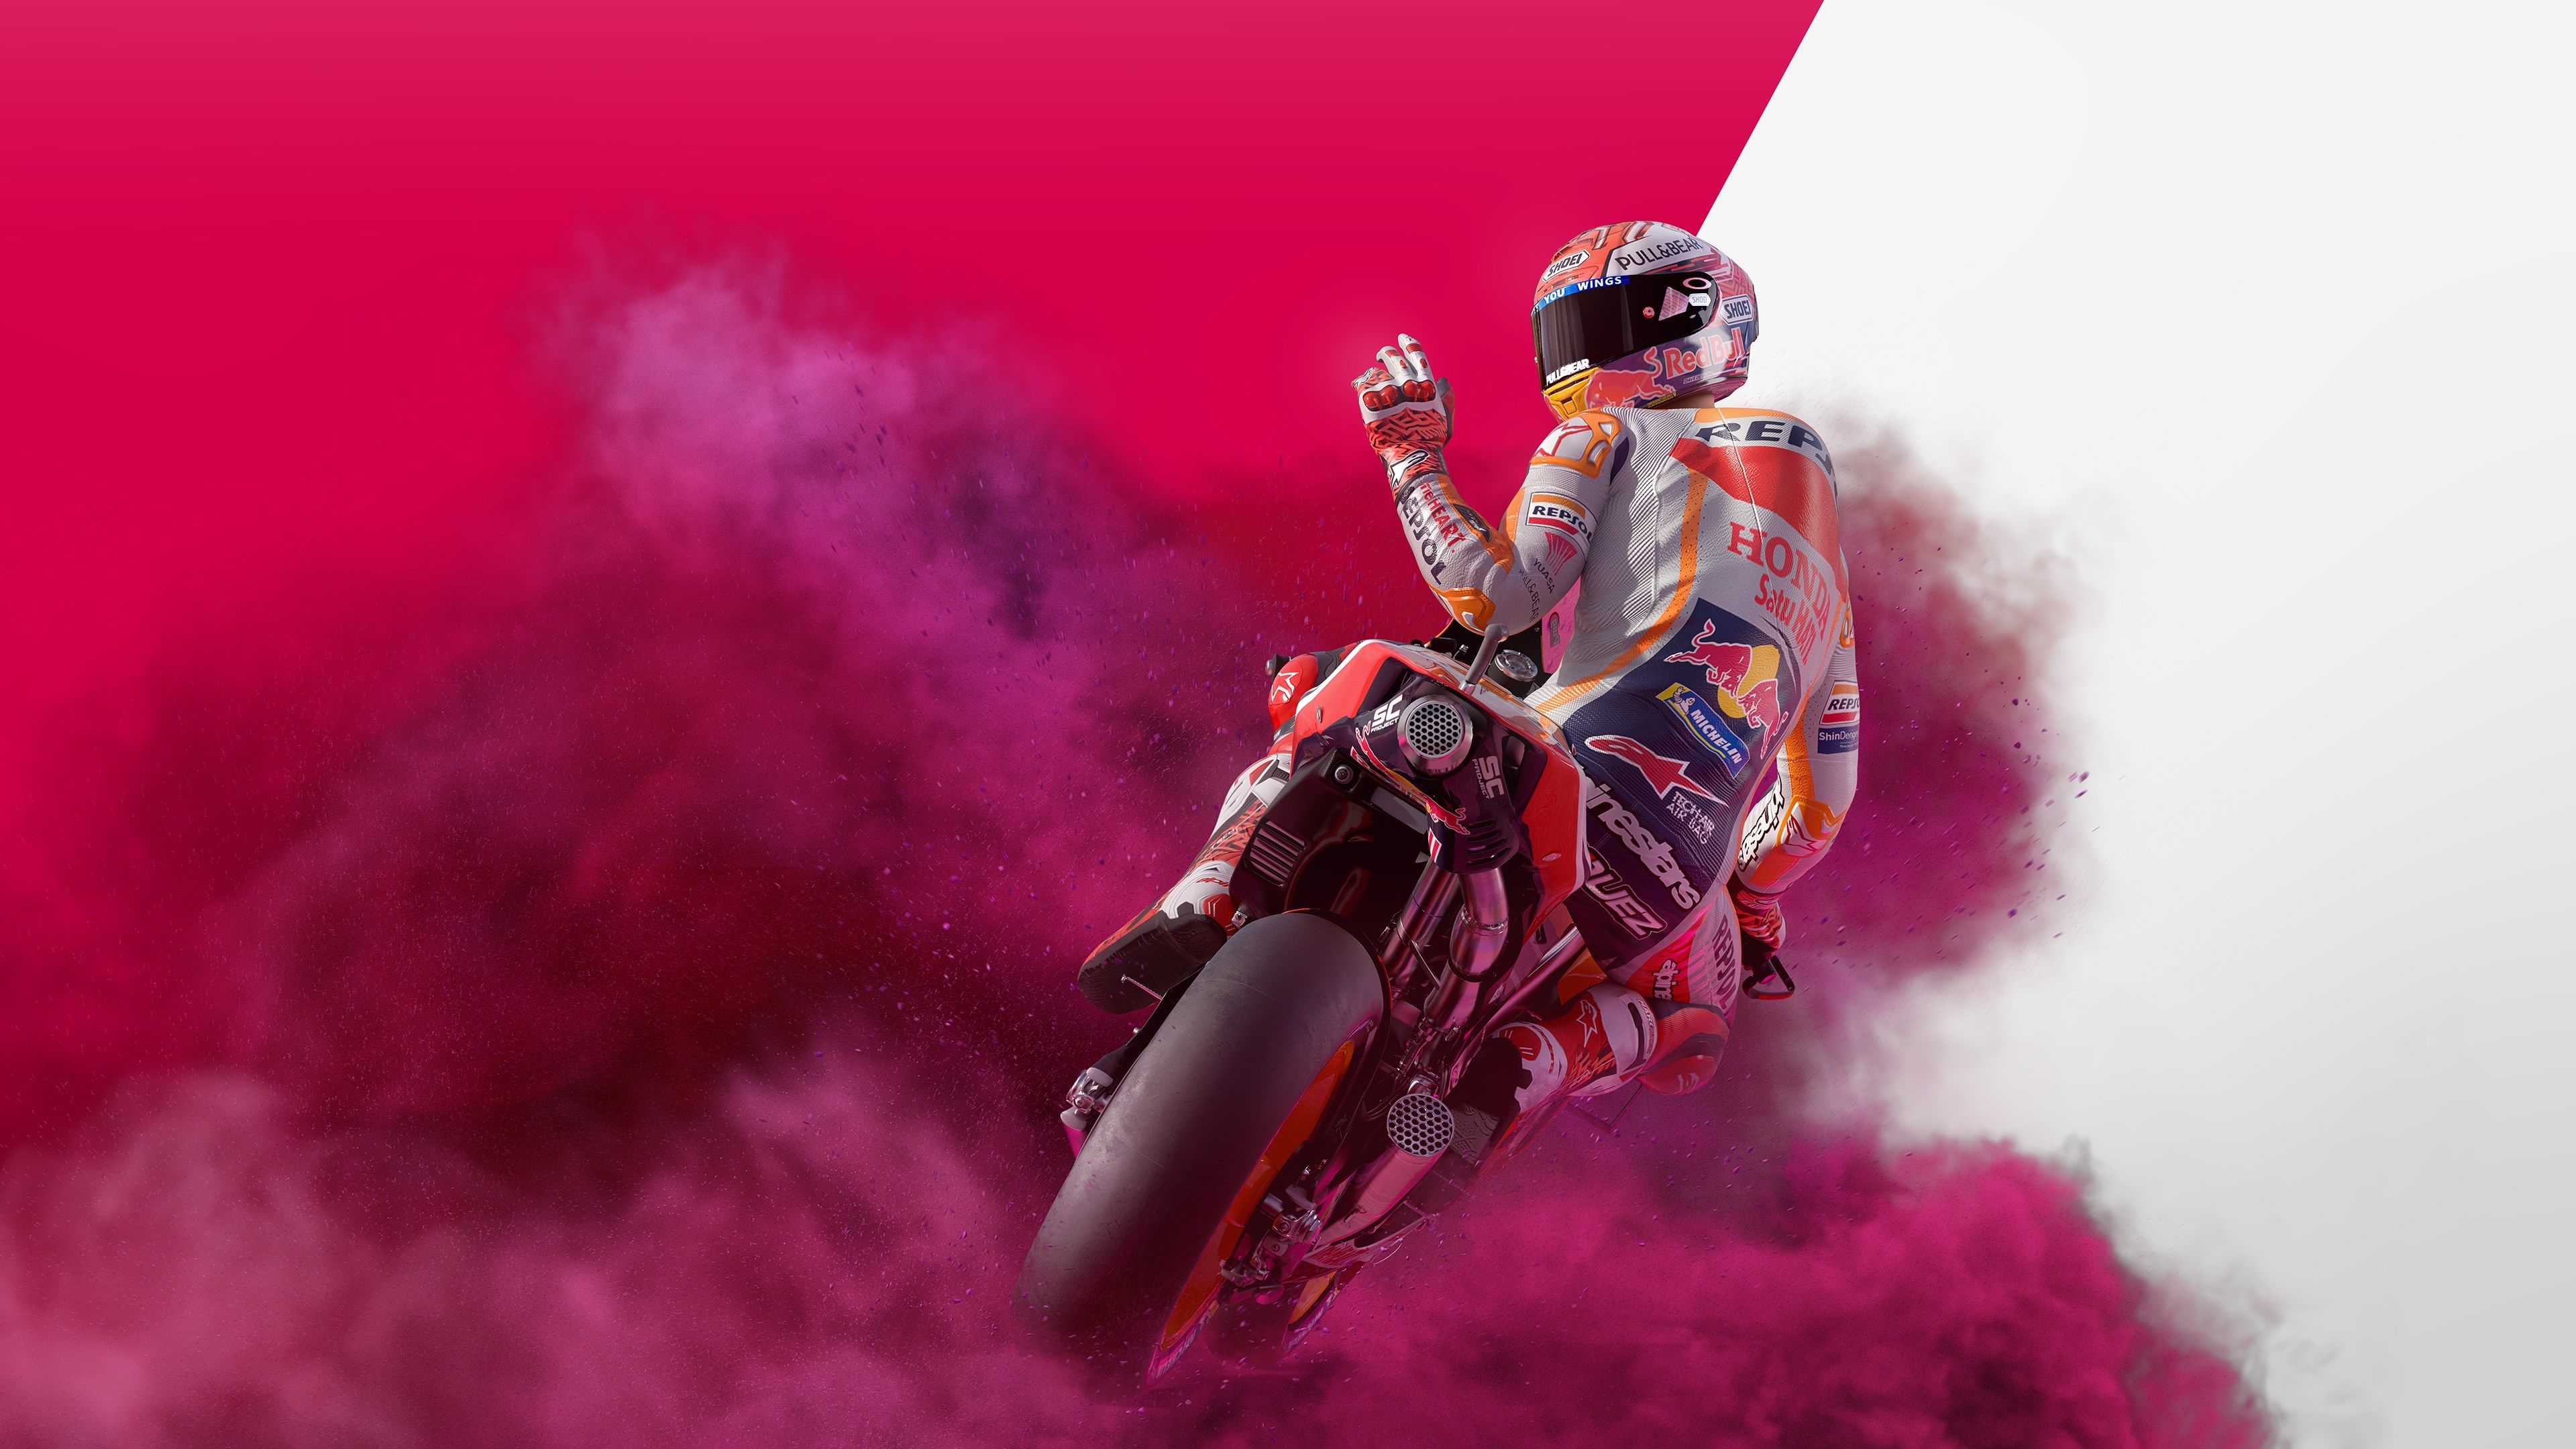 MotoGp 19 Game 2560x1080 Resolution Wallpaper, HD Games 4K Wallpaper, Image, Photo and Background